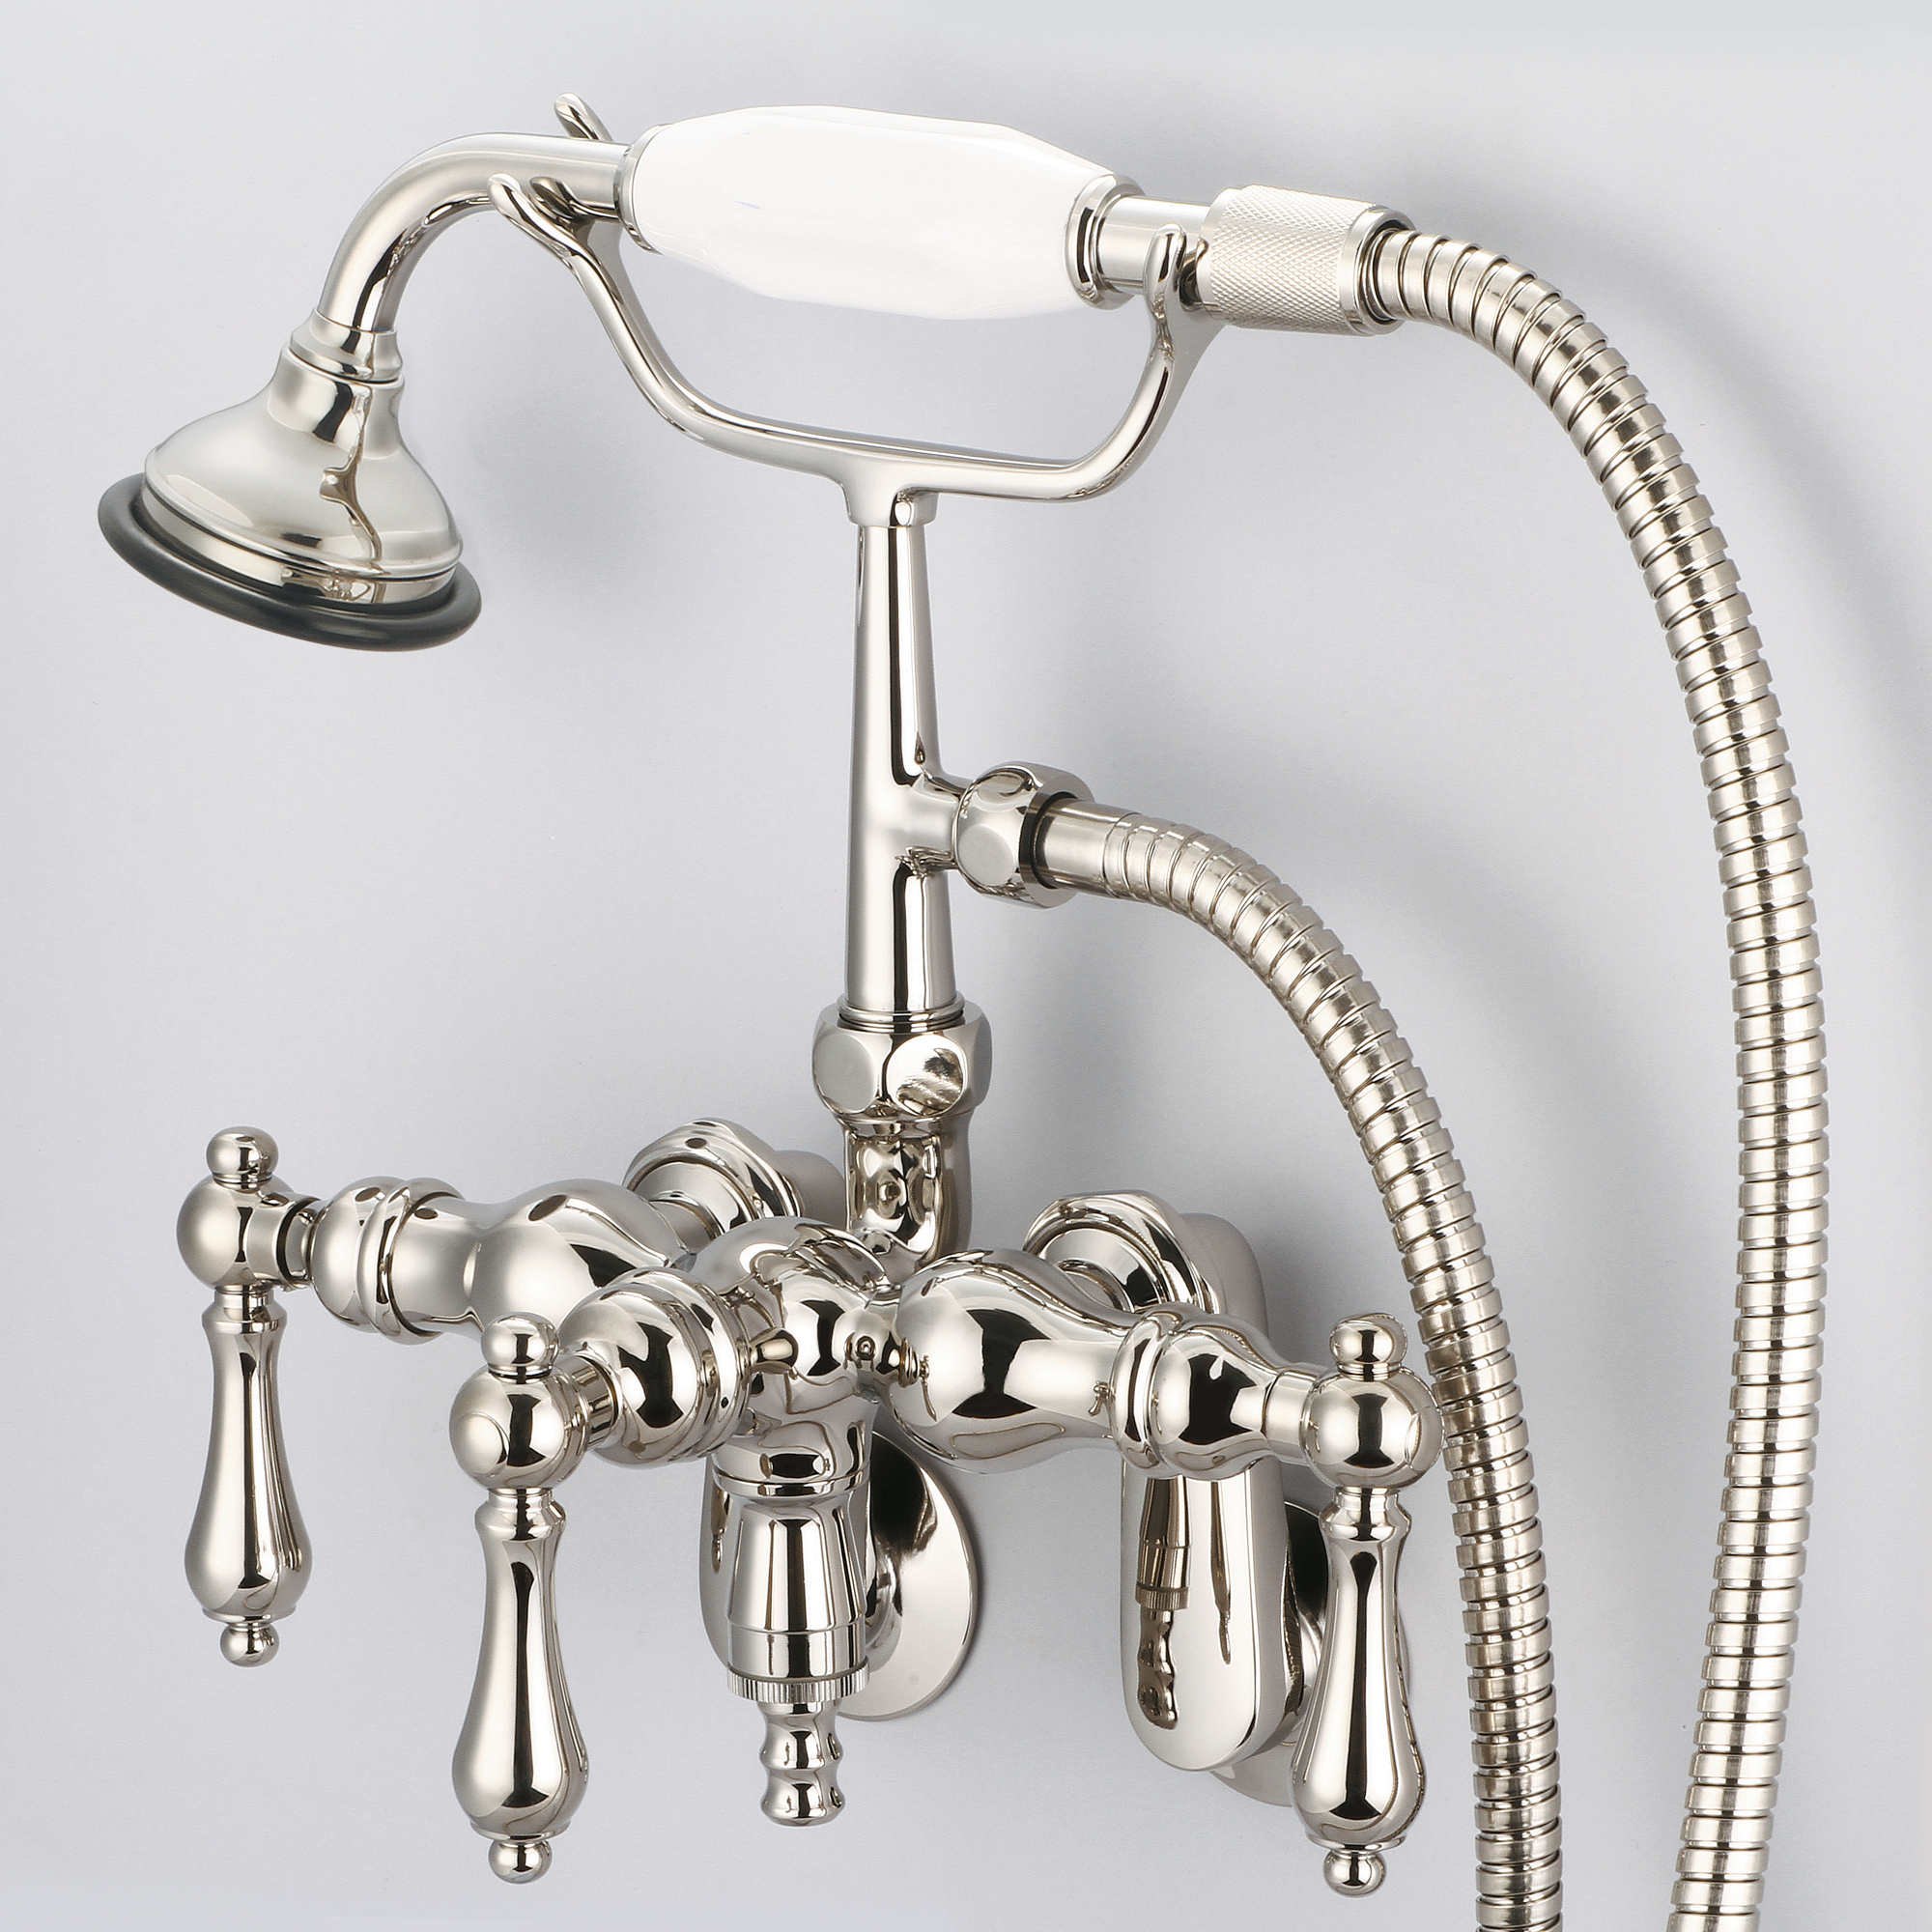 Vintage Classic Adjustable Center Wall Mount Tub Faucet With Down Spout, Swivel Wall Connector & Handheld Shower in Polished Nickel (PVD) Finish With Metal Lever Handles Without Labels